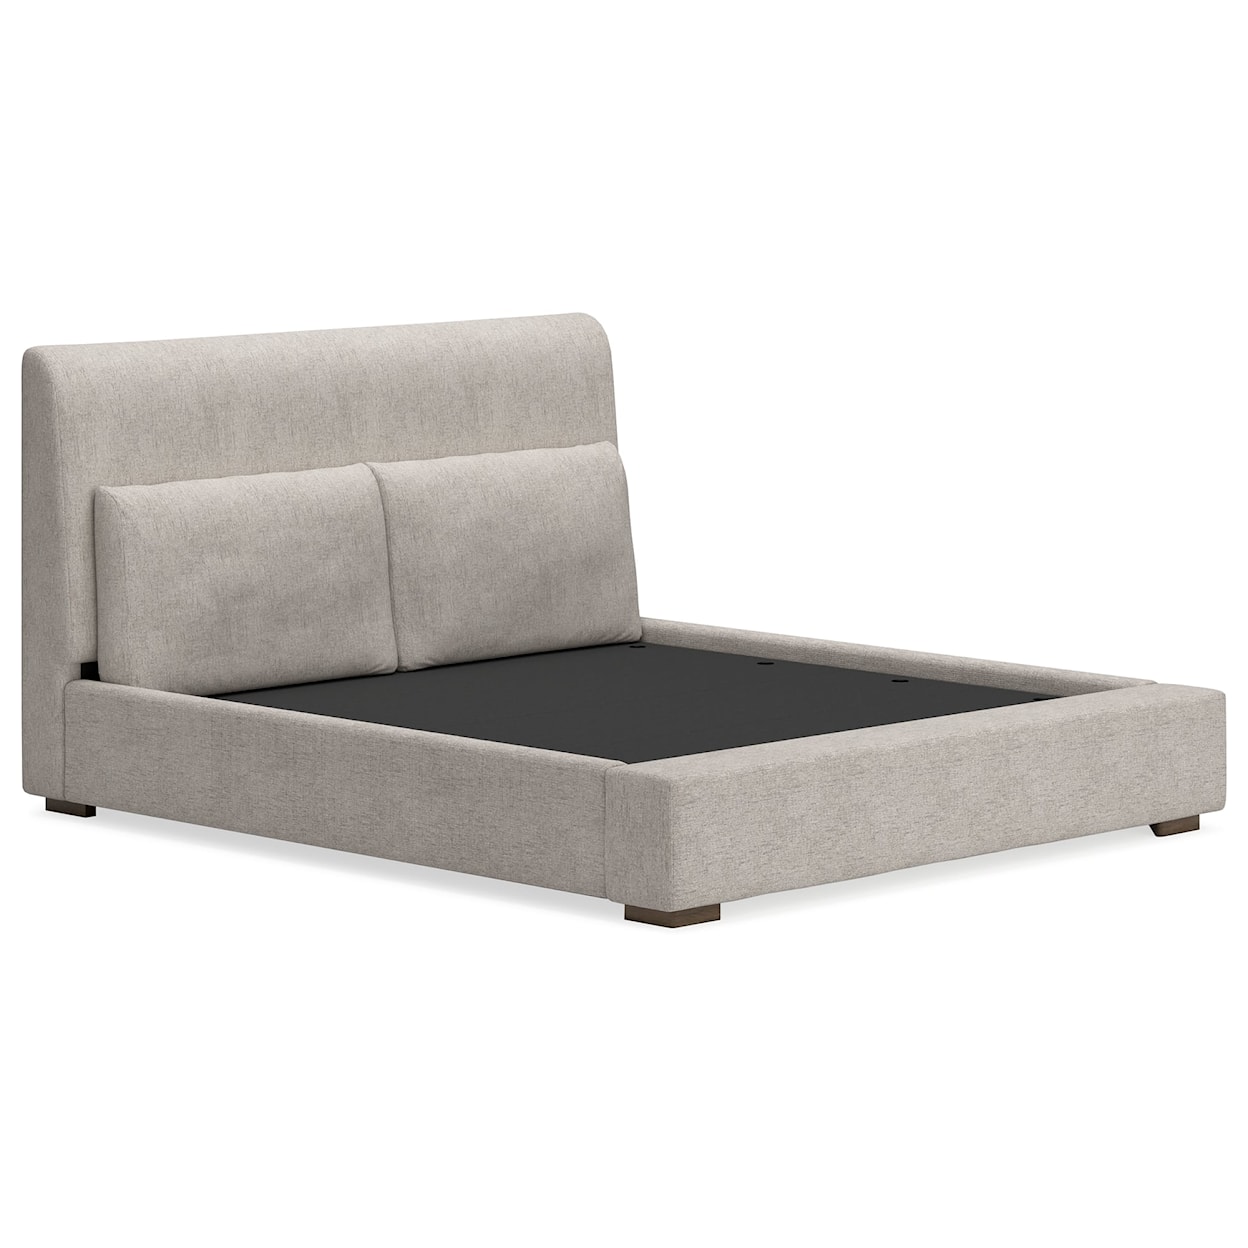 Signature Cabalynn Queen Upholstered Bed